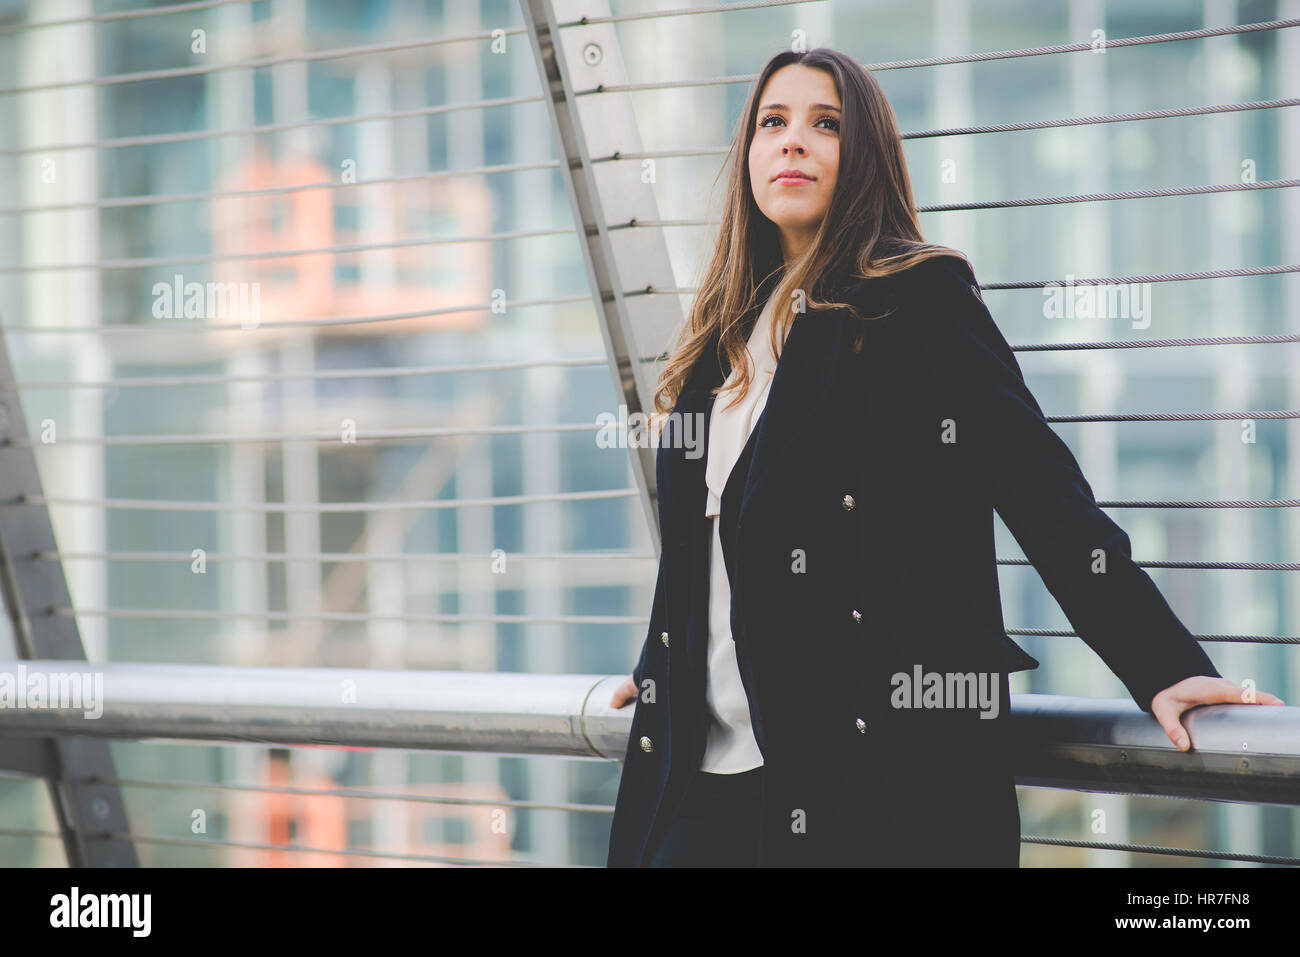 young authentic business woman in urban setting Stock Photo